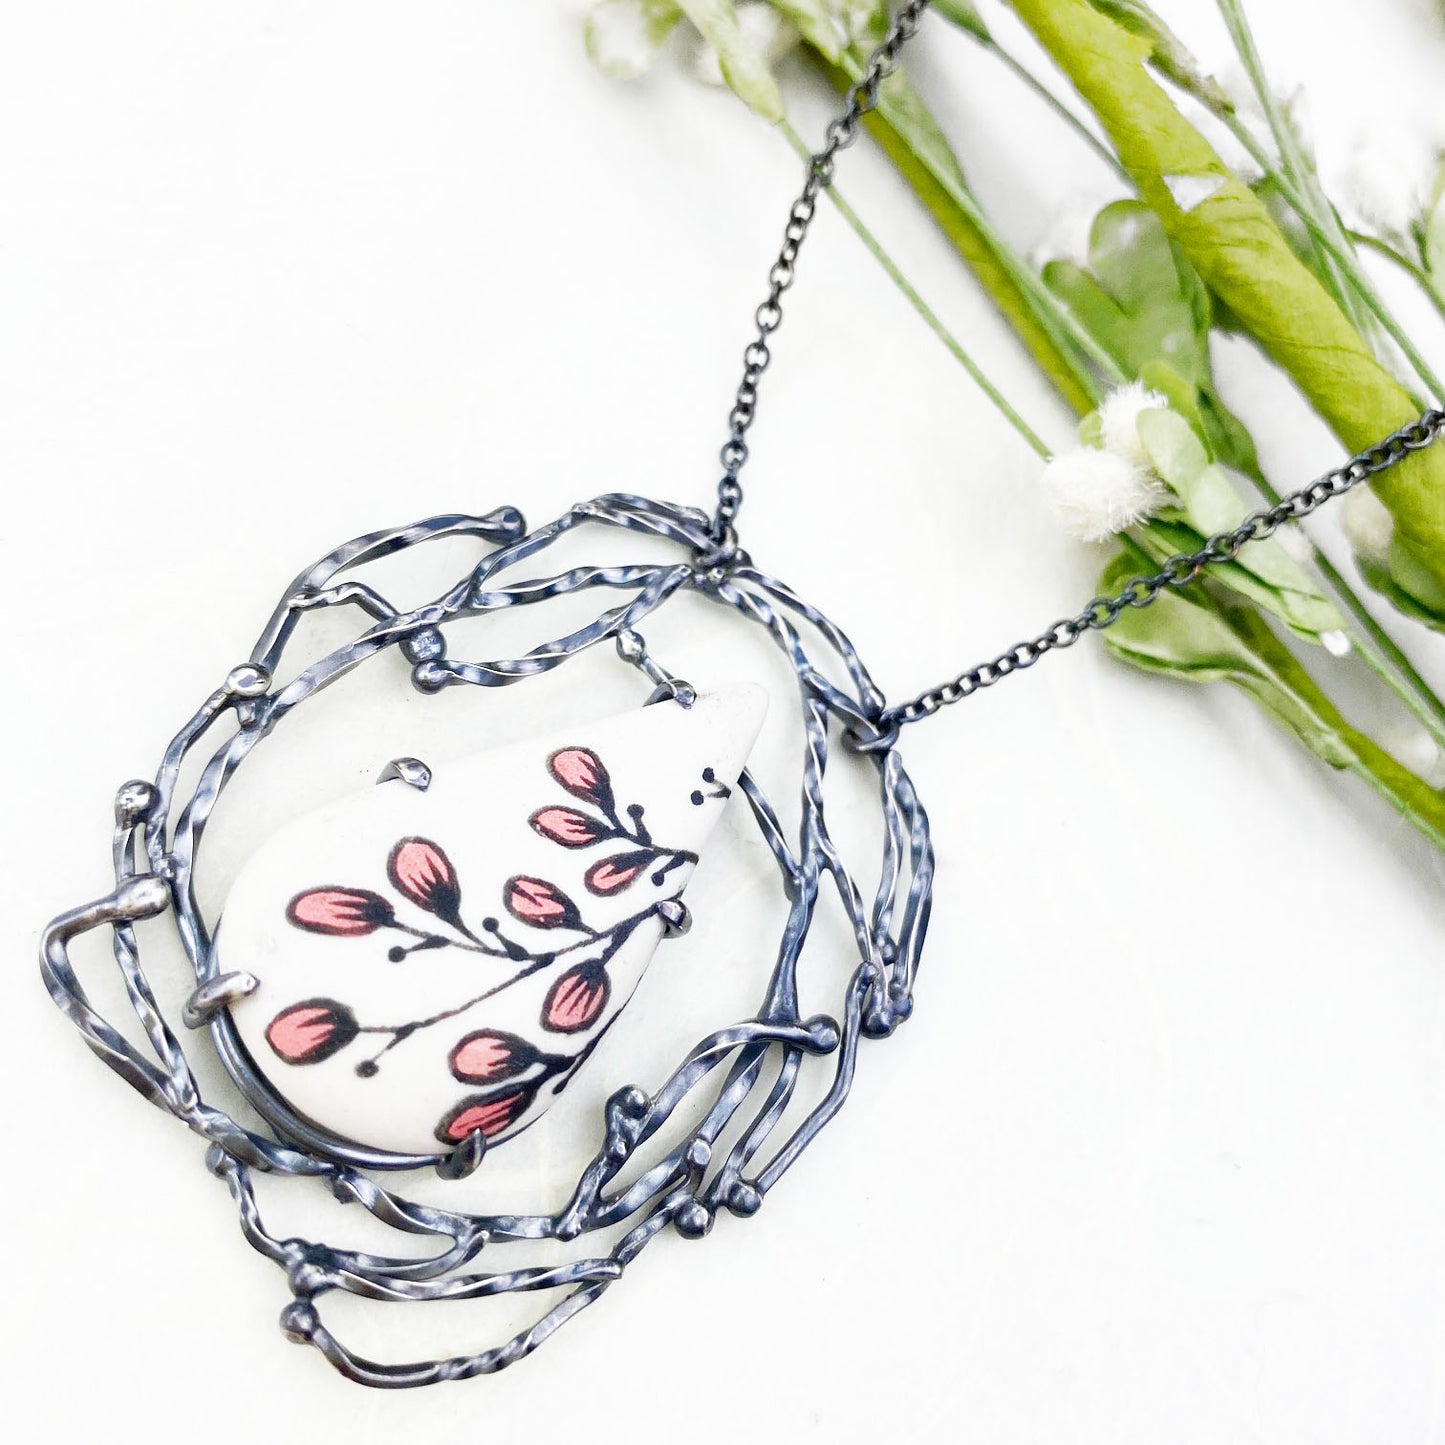 Blossom Wreath Necklace